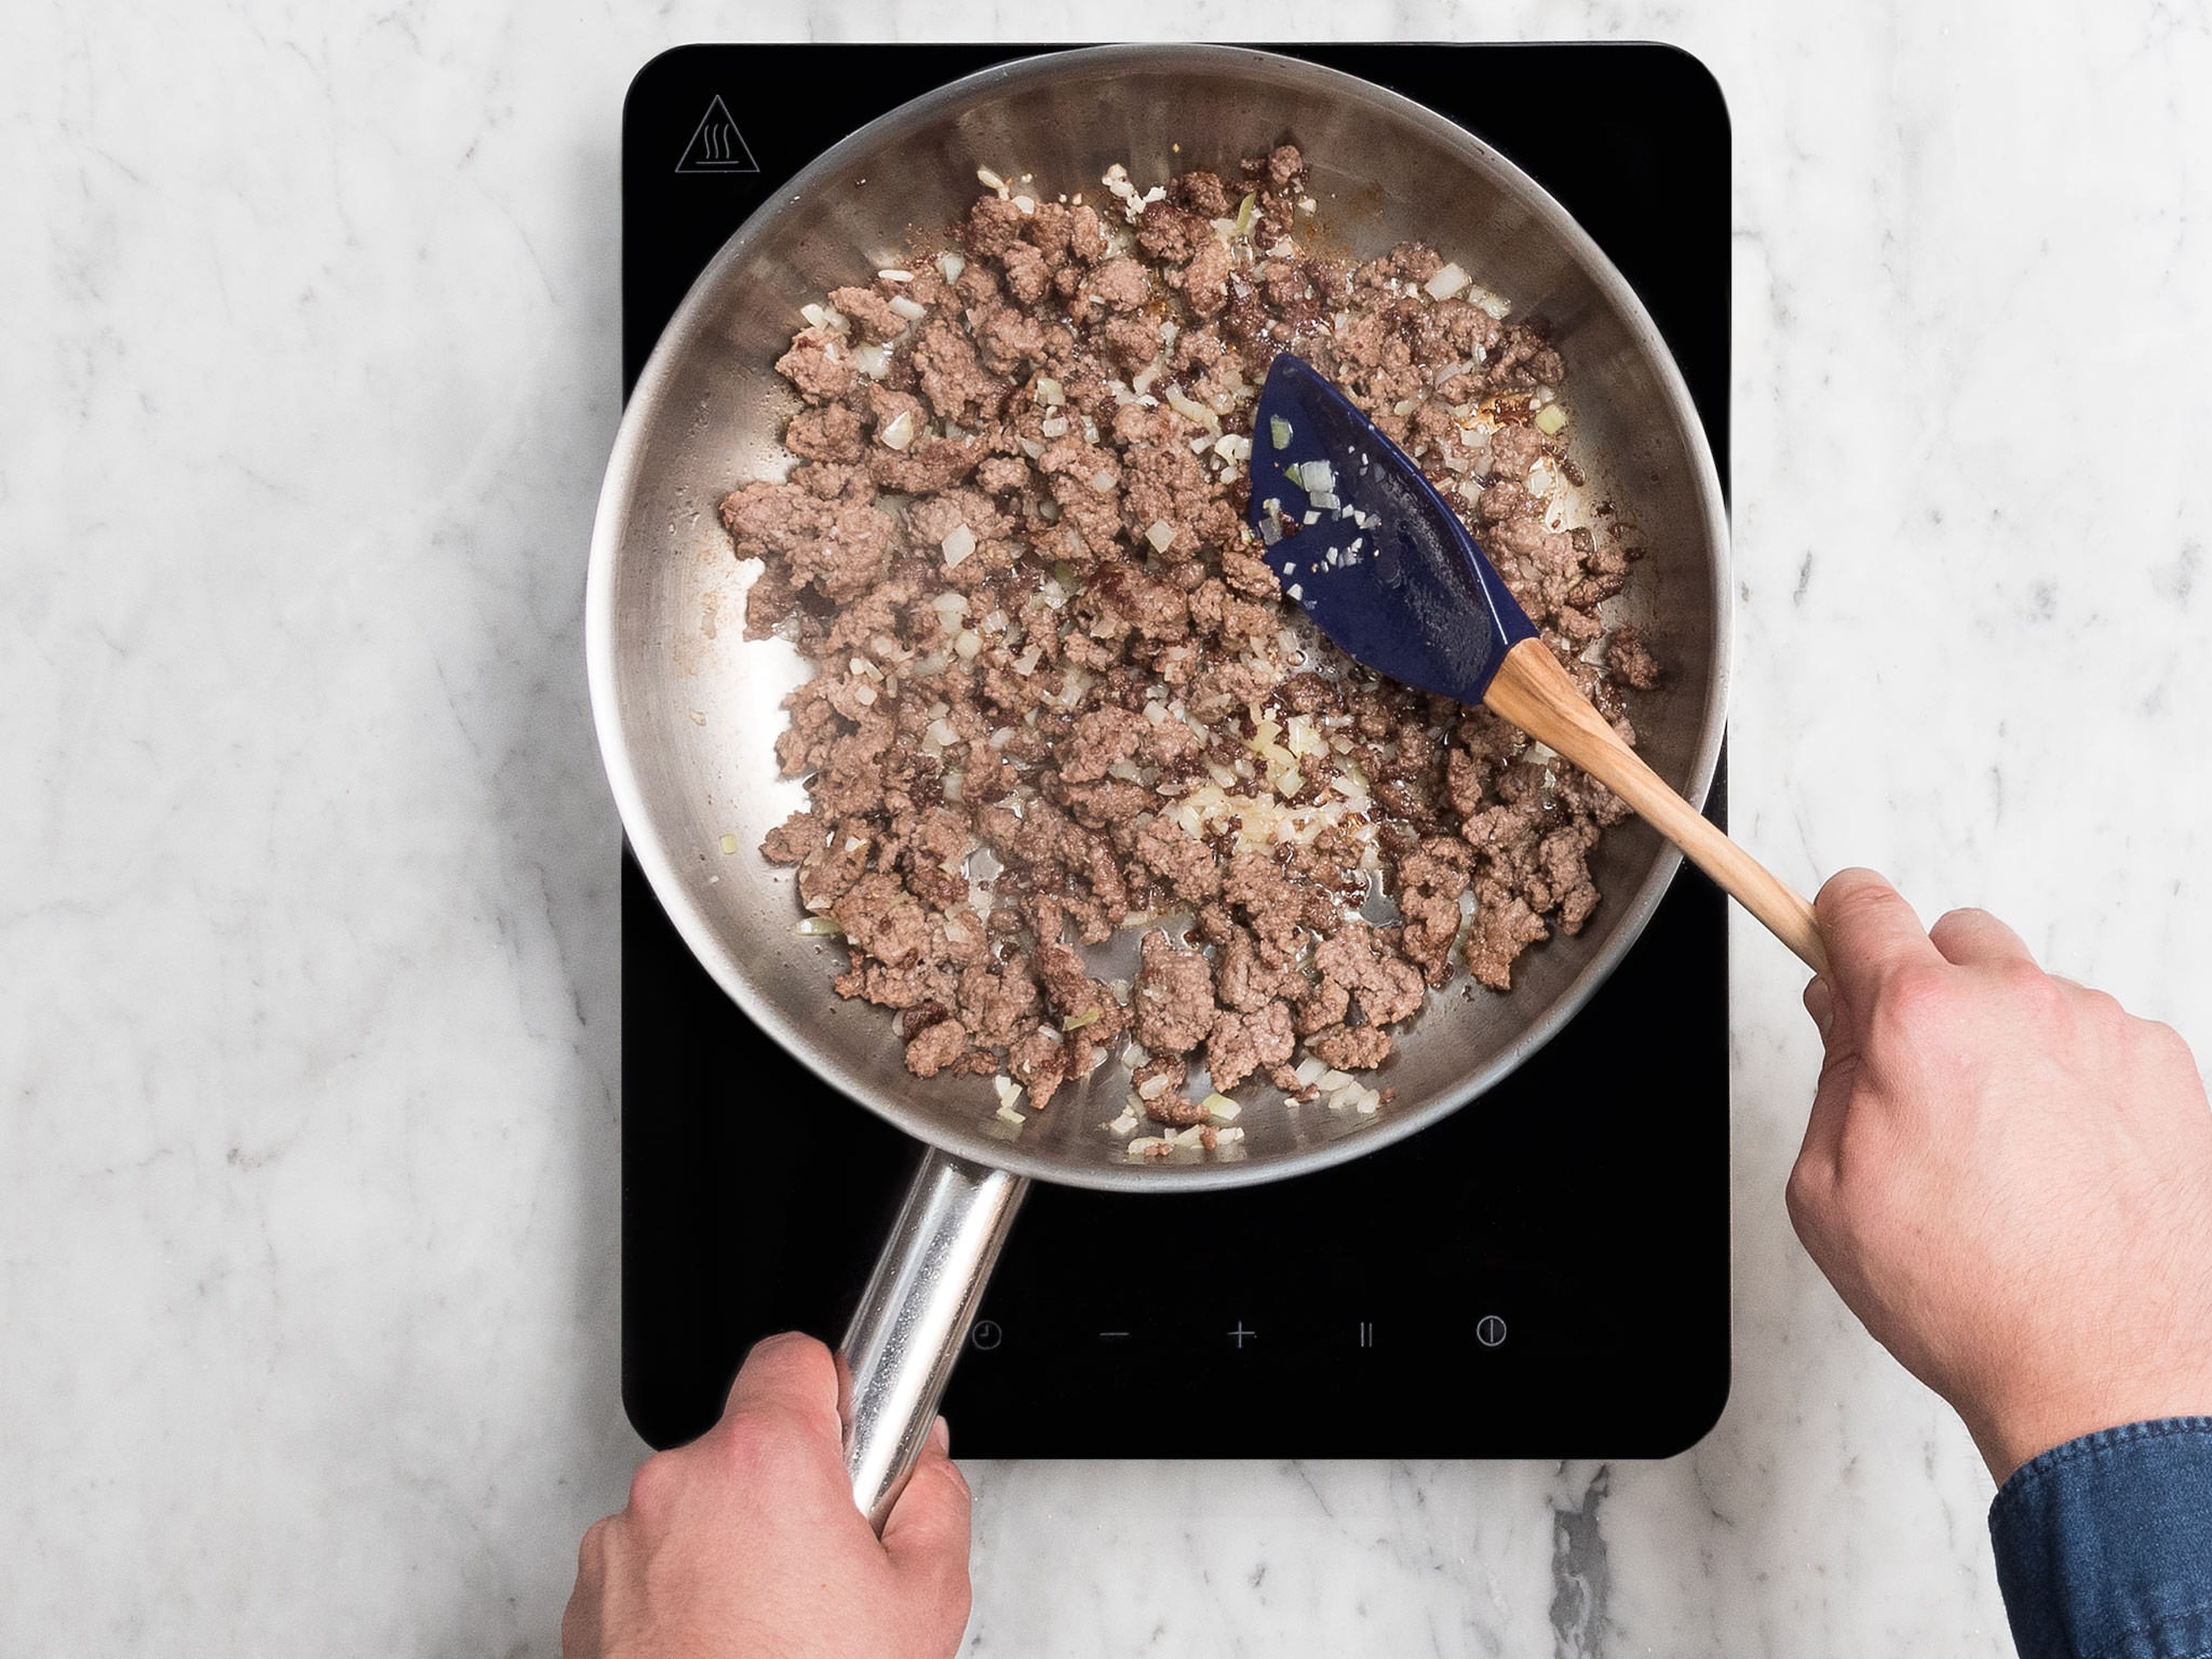 Peel garlic and onion. Mince garlic and finely dice onion. Heat vegetable oil in a frying pan over medium-high heat. Add ground beef, onion, and garlic and sauté for approx. 2 – 3 min. Season to taste with salt and pepper.